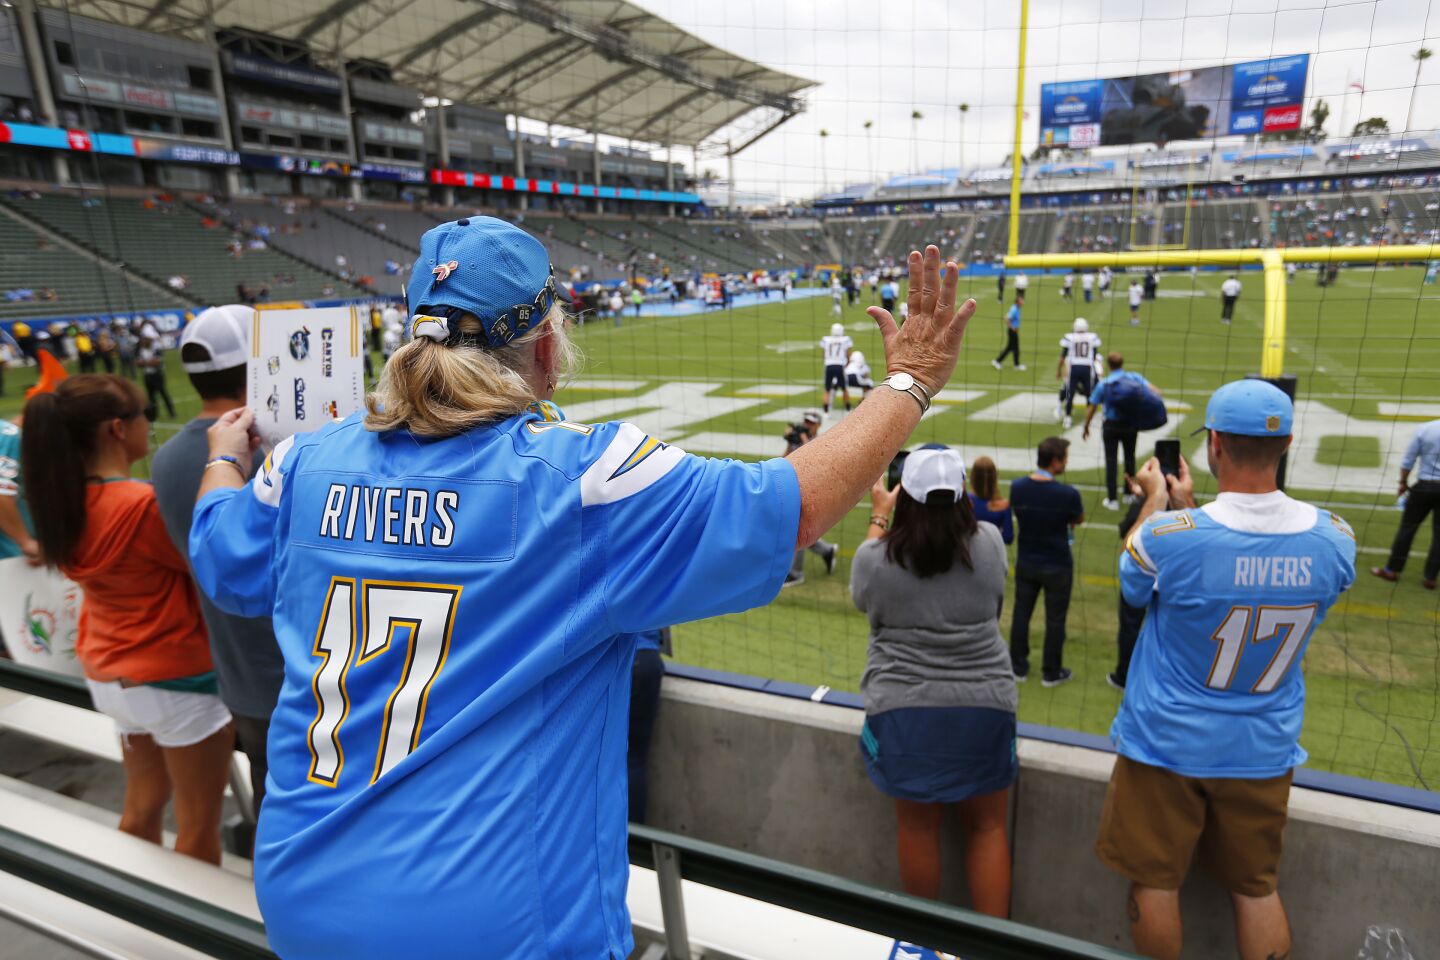 Fan Debbie Burke cheers on Philip Rivers as he warms up before the Los Angeles Chargers played the Miami Dolphins at the StubHub Center on Sunday, Sept. 17, 2017.